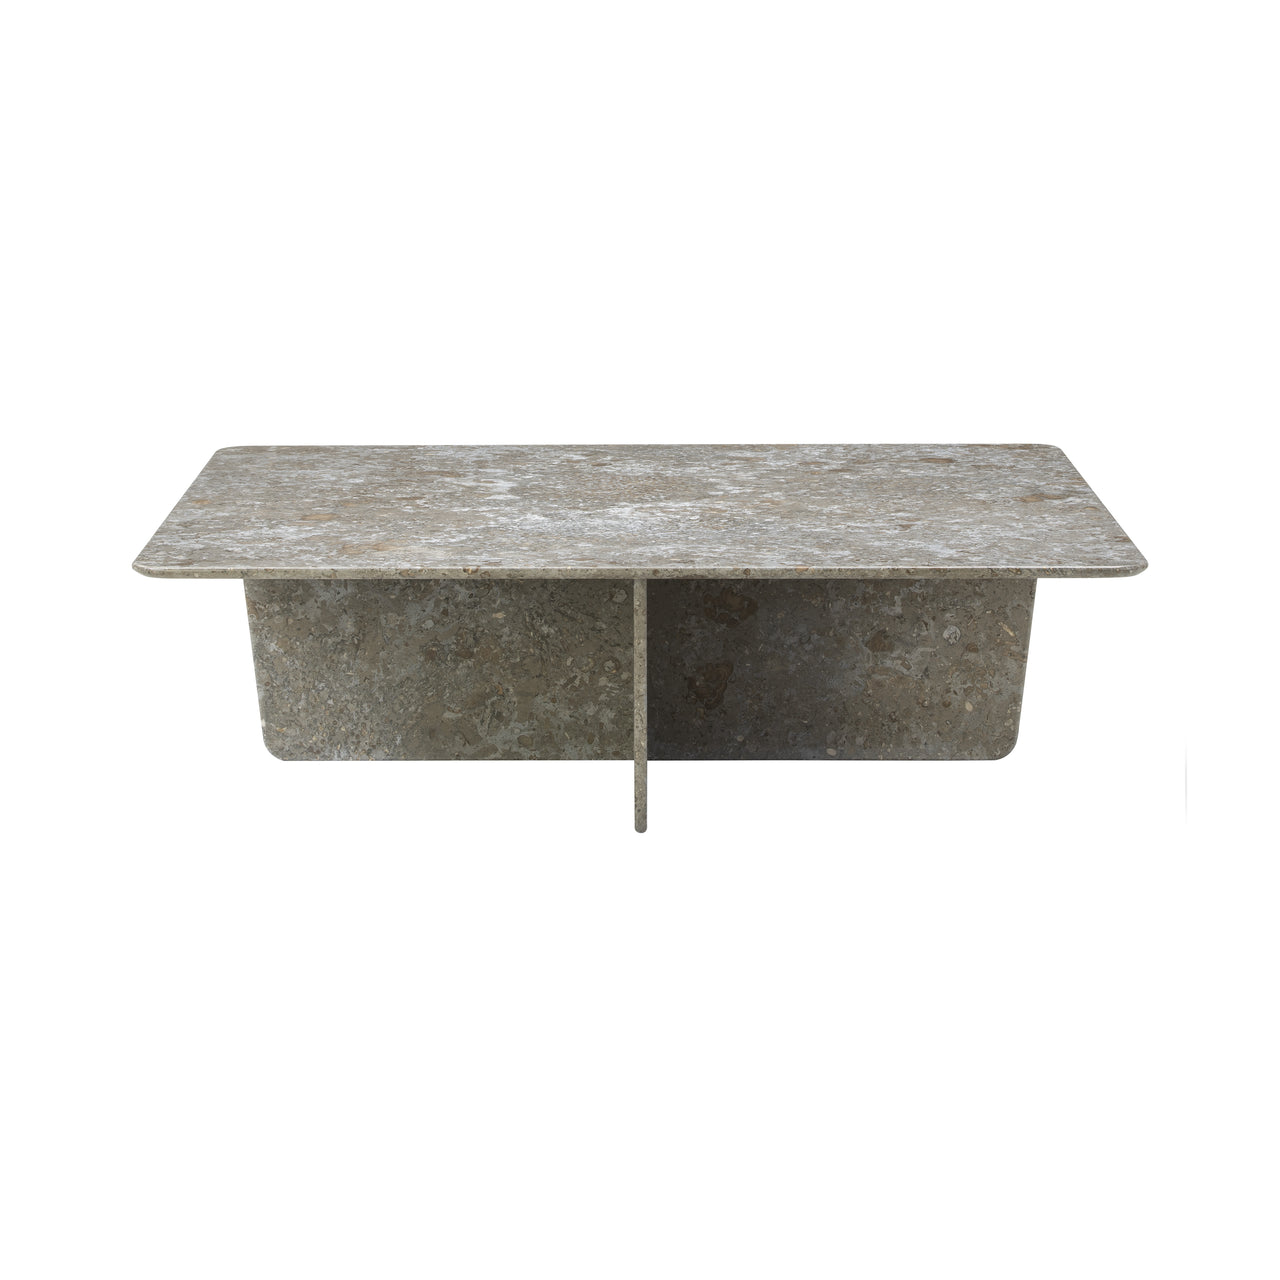 Tableau Coffee Table: Square + Large - 55.1